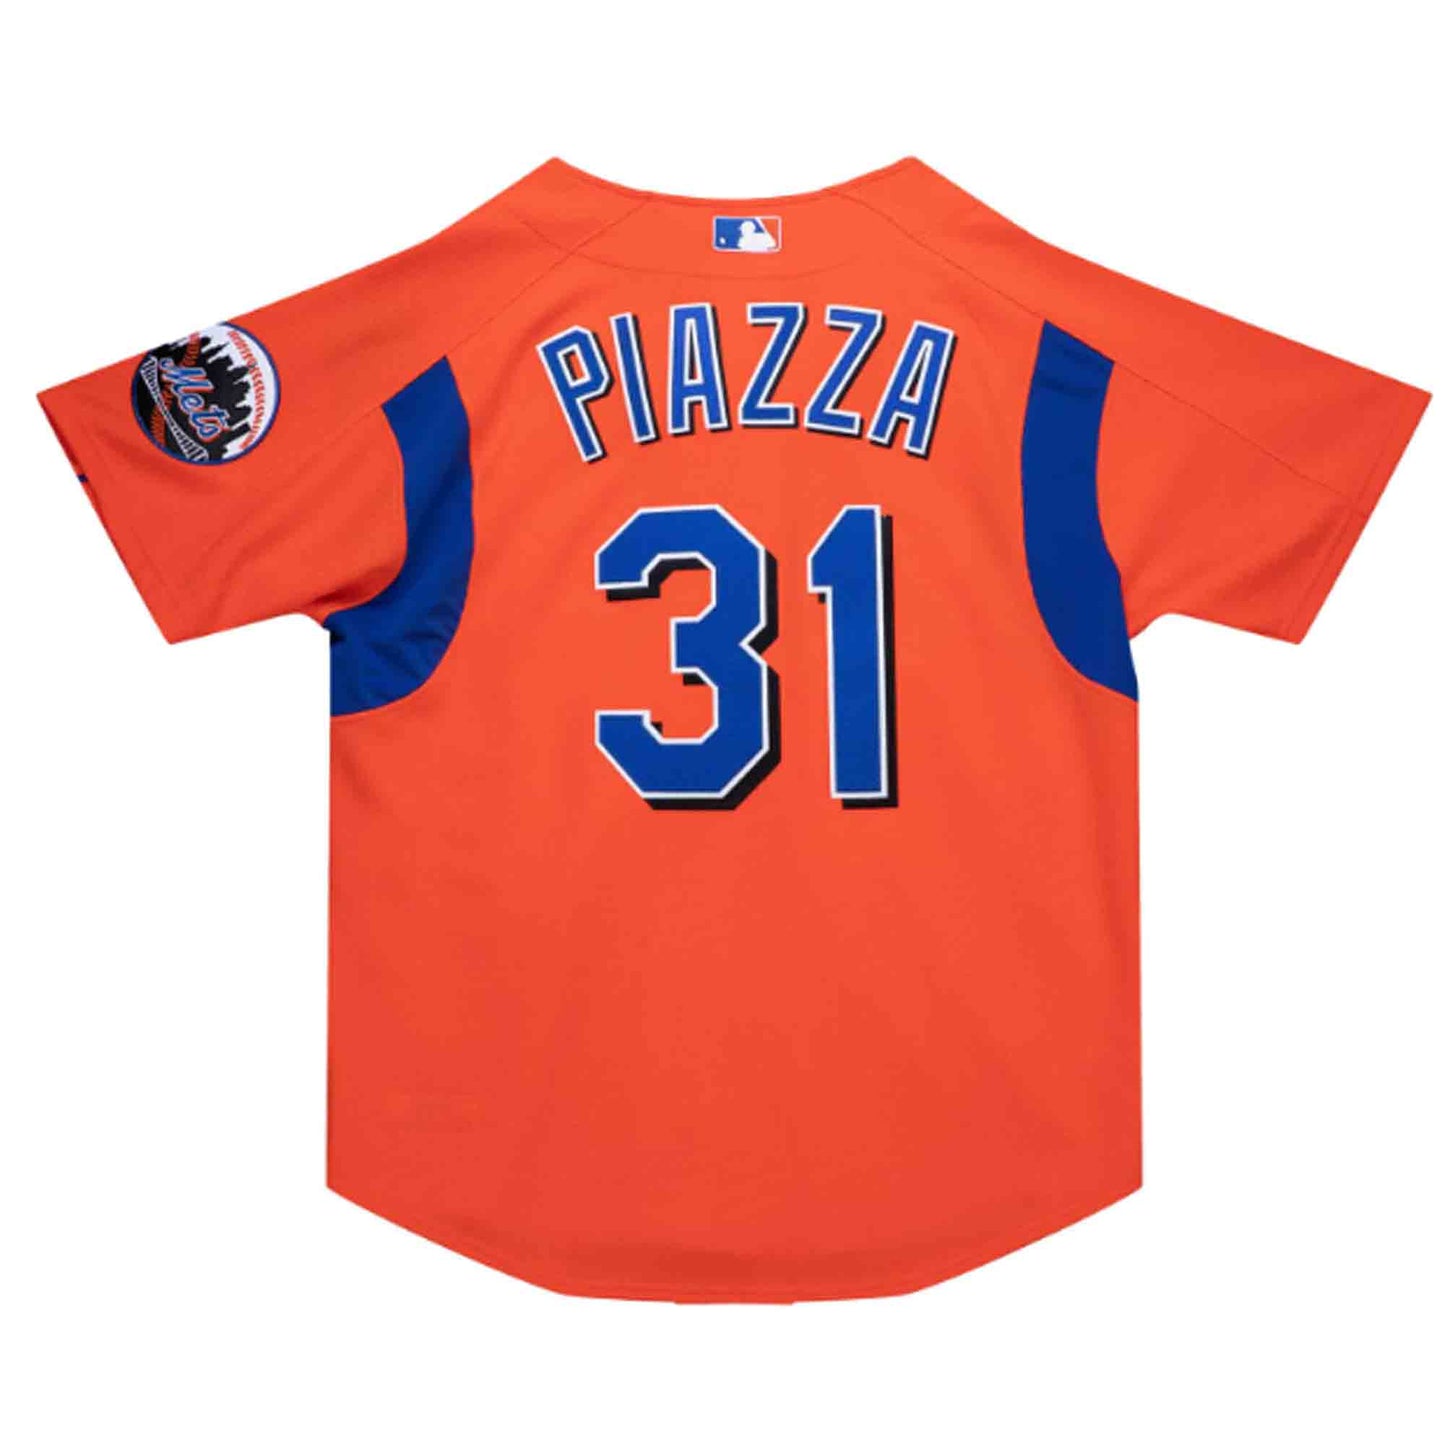 MLB Authentic BP Button Front Jersey New York Mets 2004 Mike Piazza #31